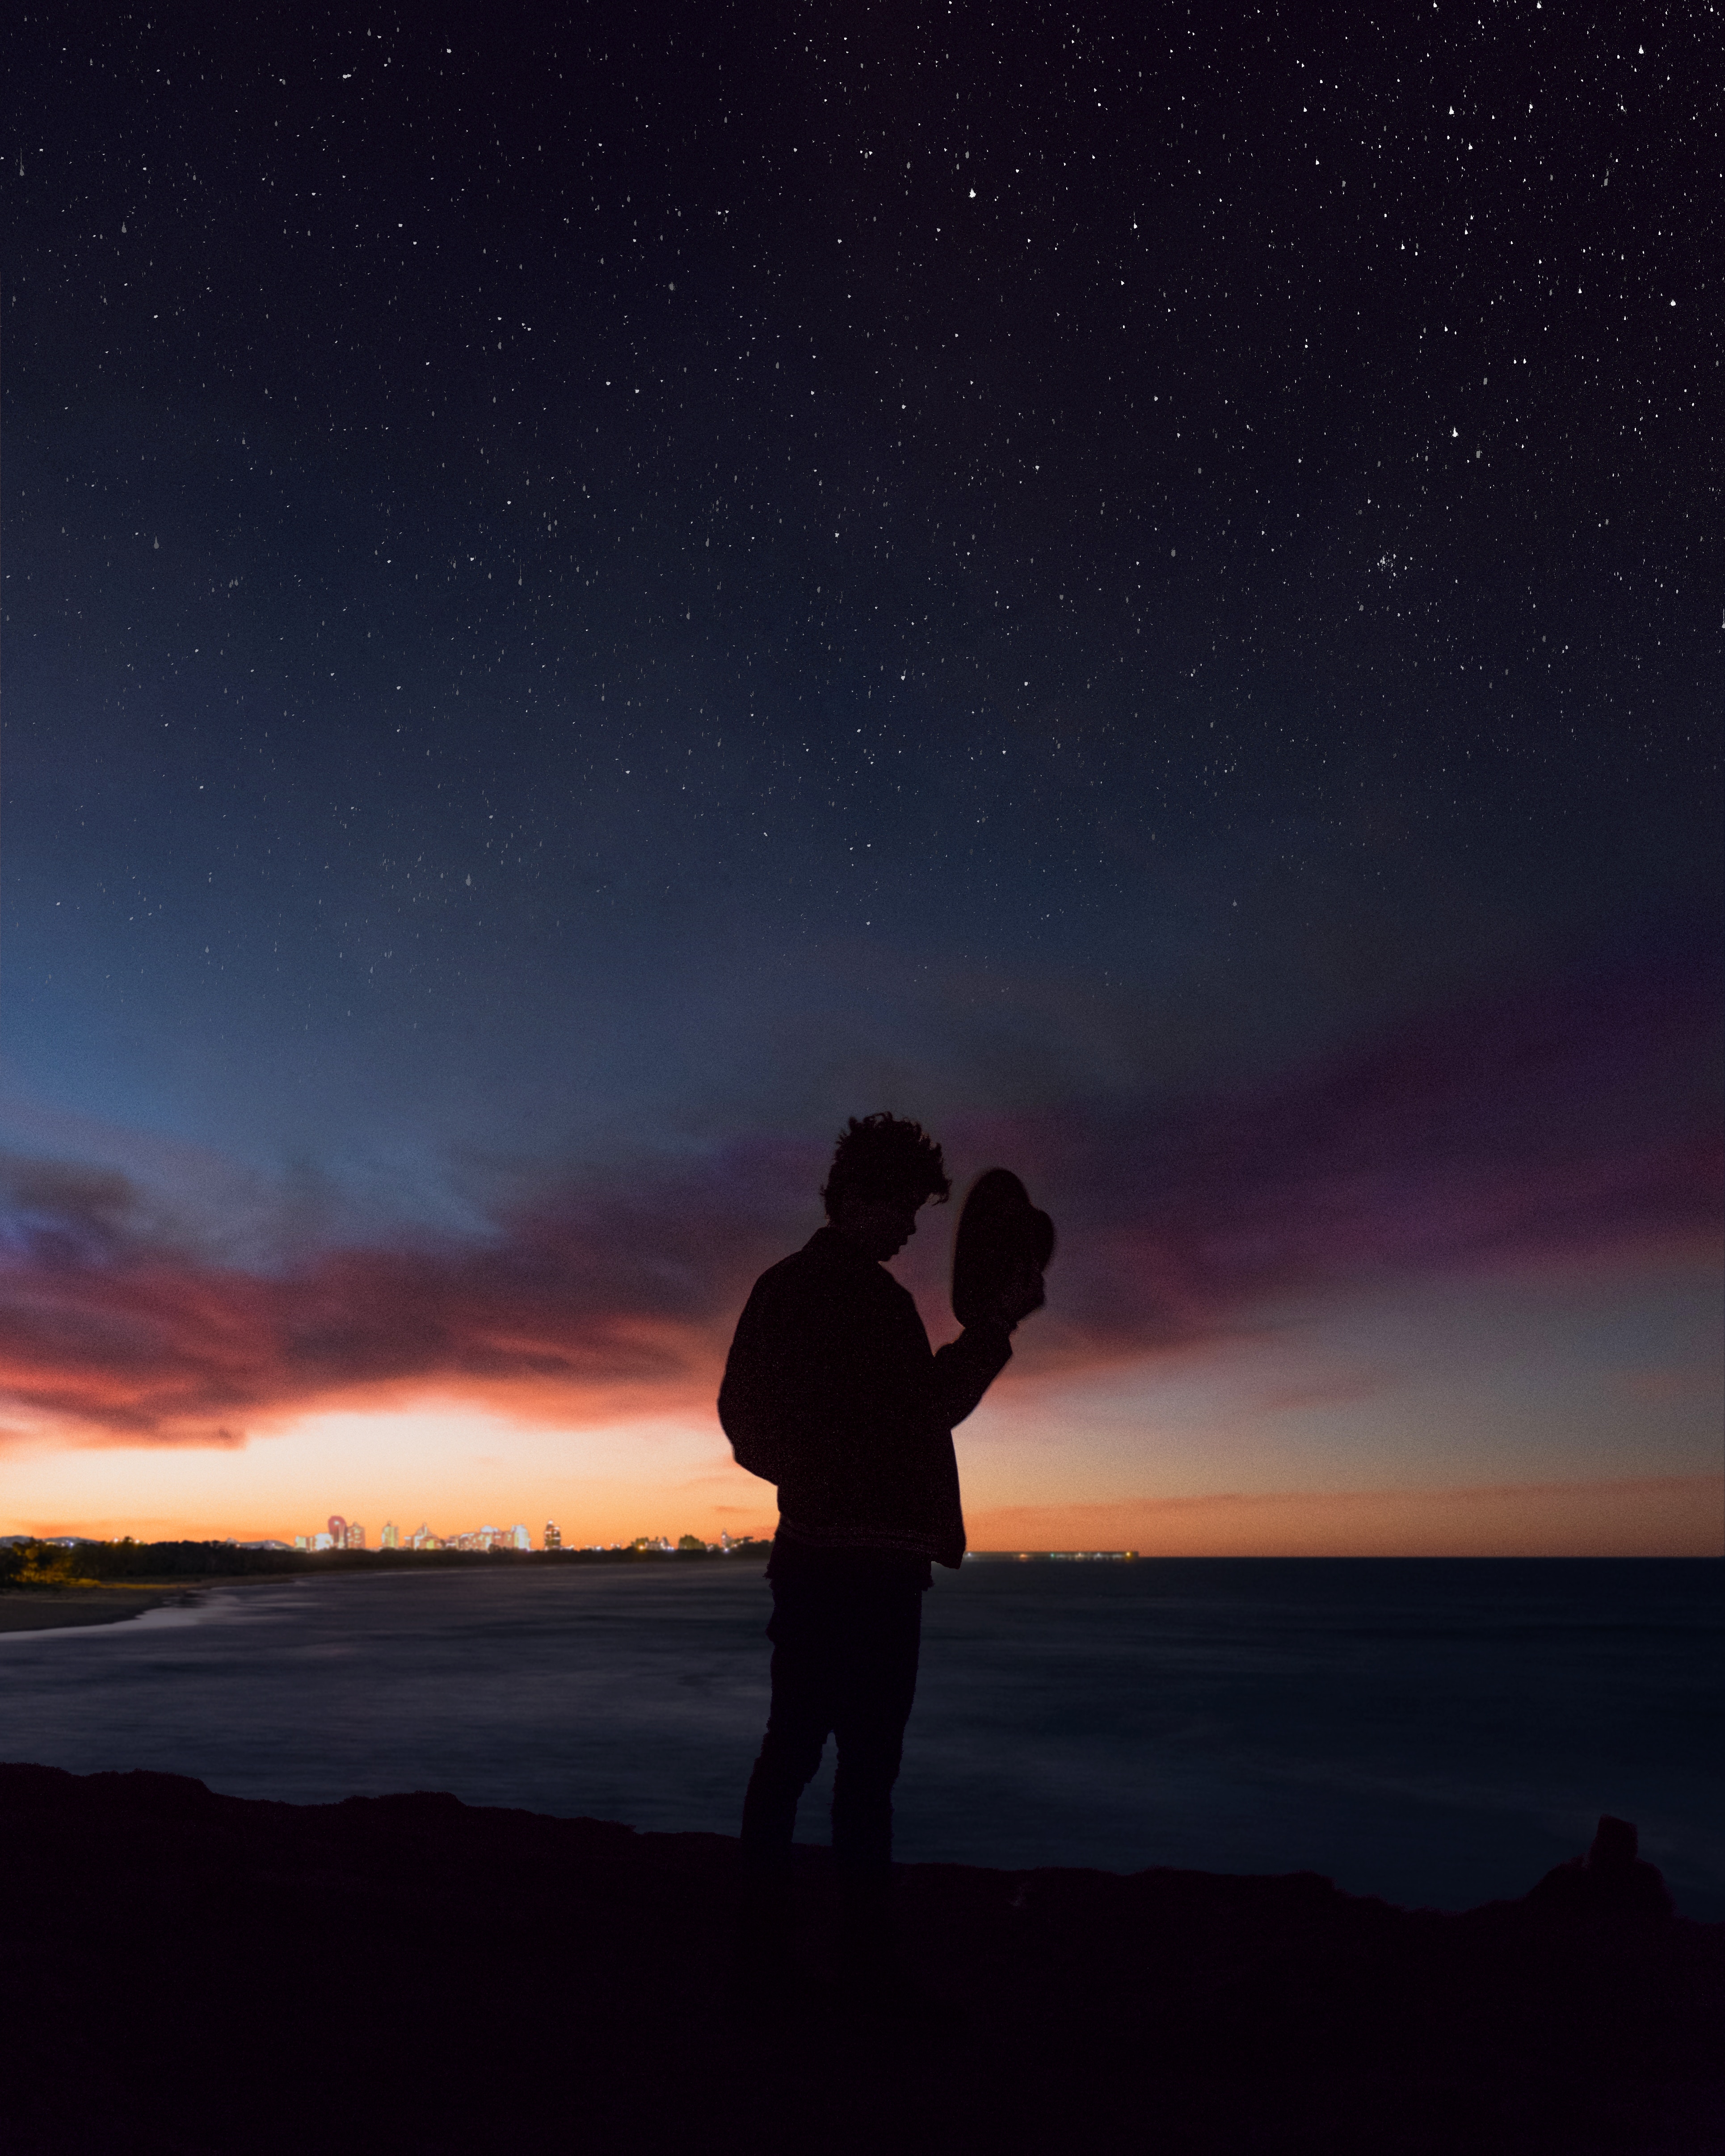 Desktop Backgrounds Loneliness silhouette, horizon, seclusion, starry sky